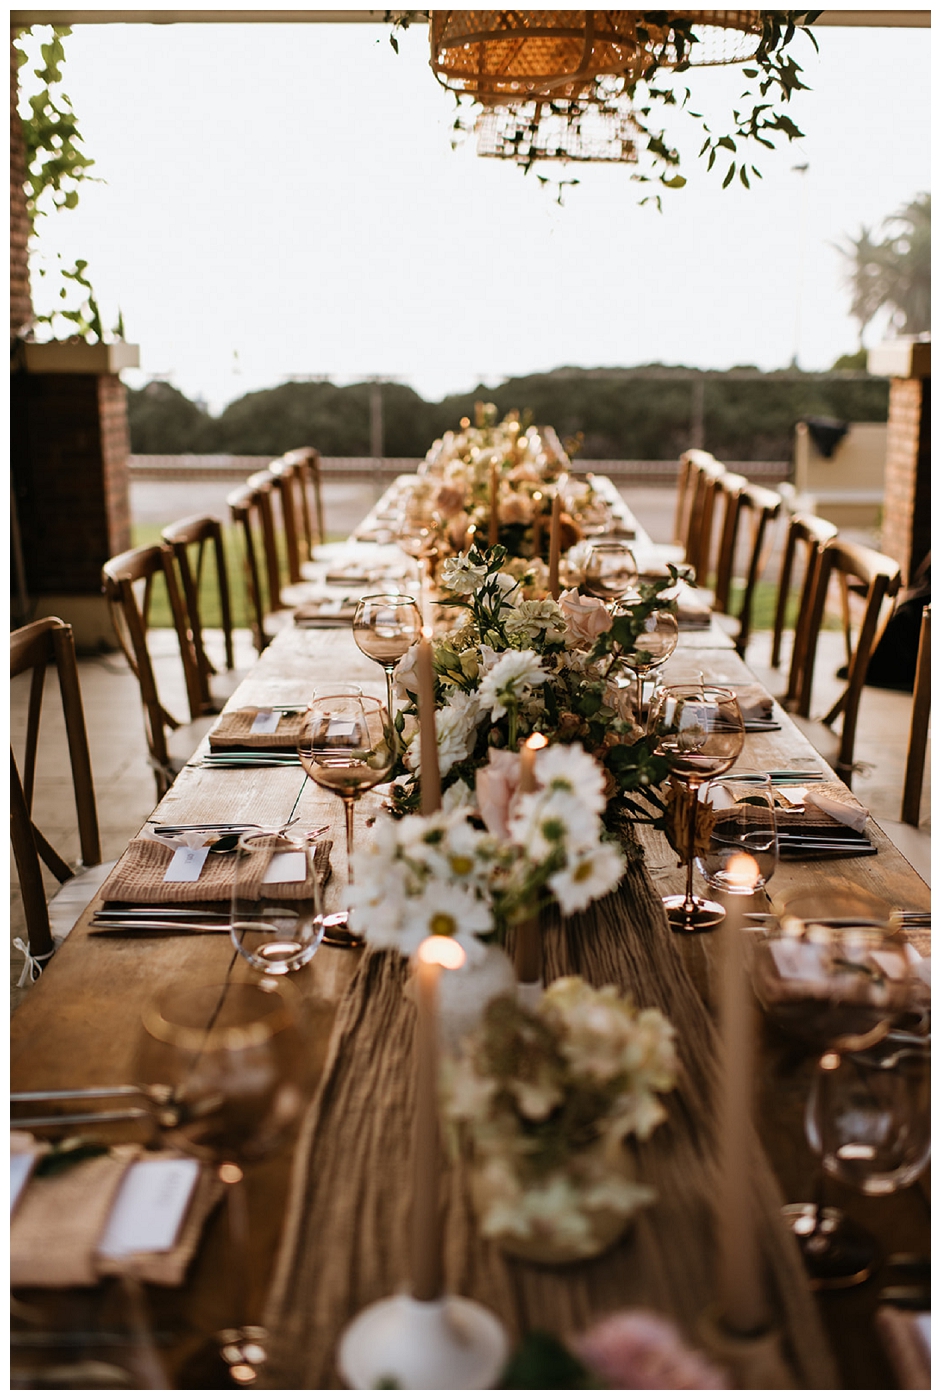 long shot of farmhouse table wedding reception topped with blush runner and floral centerpieces surrounded by tapered candles, del mar surf station, farmhouse table, budvases ,outdoor reception, medium sized centerpieces, romantic weddings, daisies, toffee roses, berries, cream flowers, white flowers, hydrangeas, majolica roses, explosion grass, outdoor wedding, covid wedding, san diego wedding florist, southern california elopement florist, socal florist, best wedding florist san diego ca, best wedding florist southern california, los angeles wedding florist, top rated wedding florist in california, del mar san diego, blush tapered candles, blush table runner, budvases